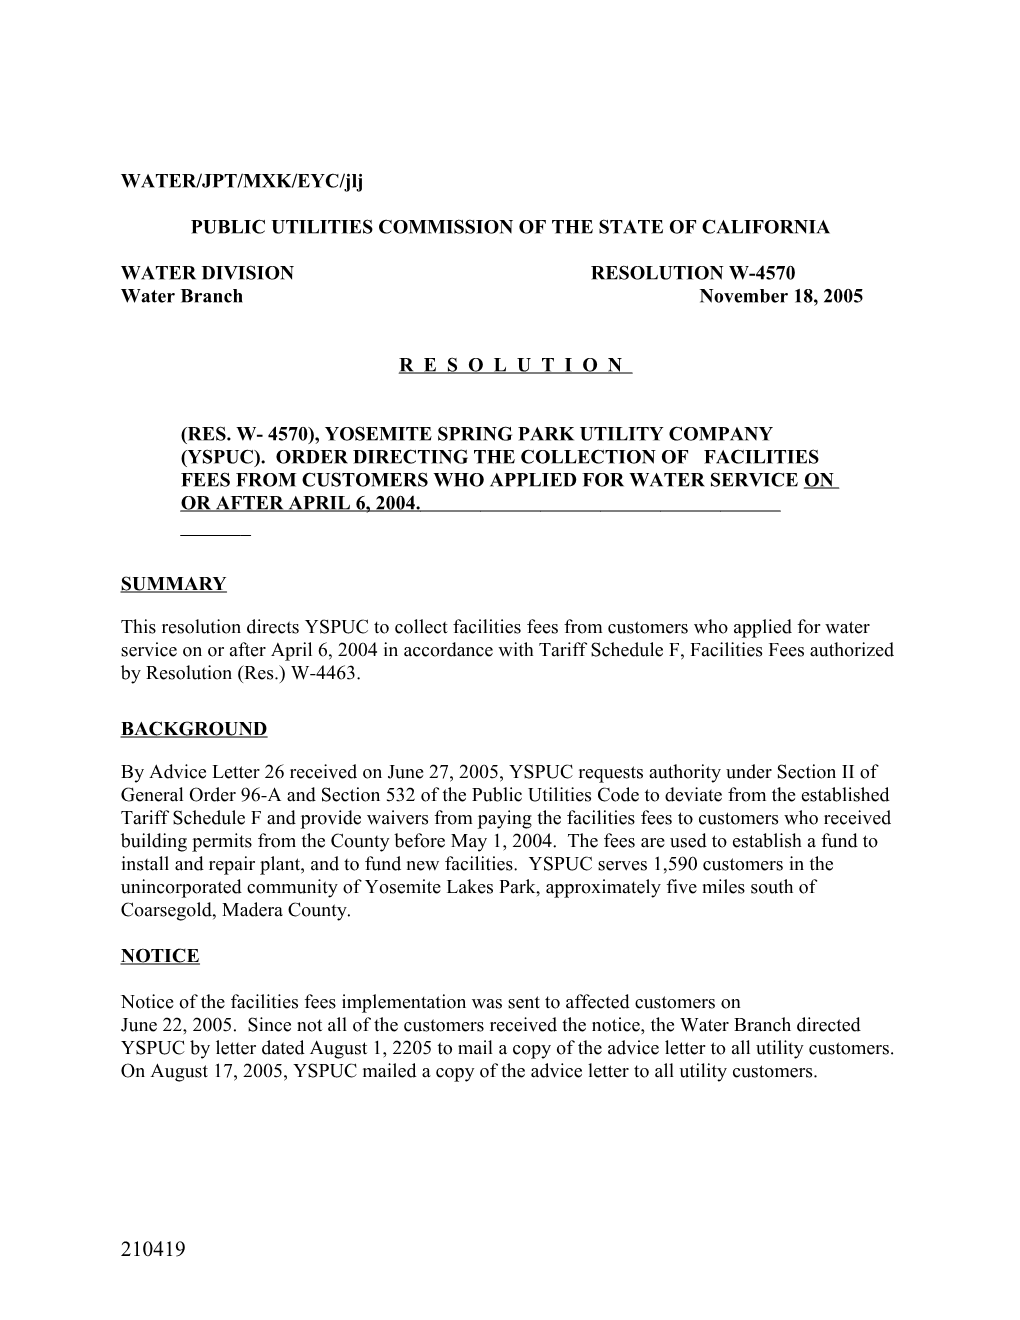 Public Utilities Commission of the State of California s14